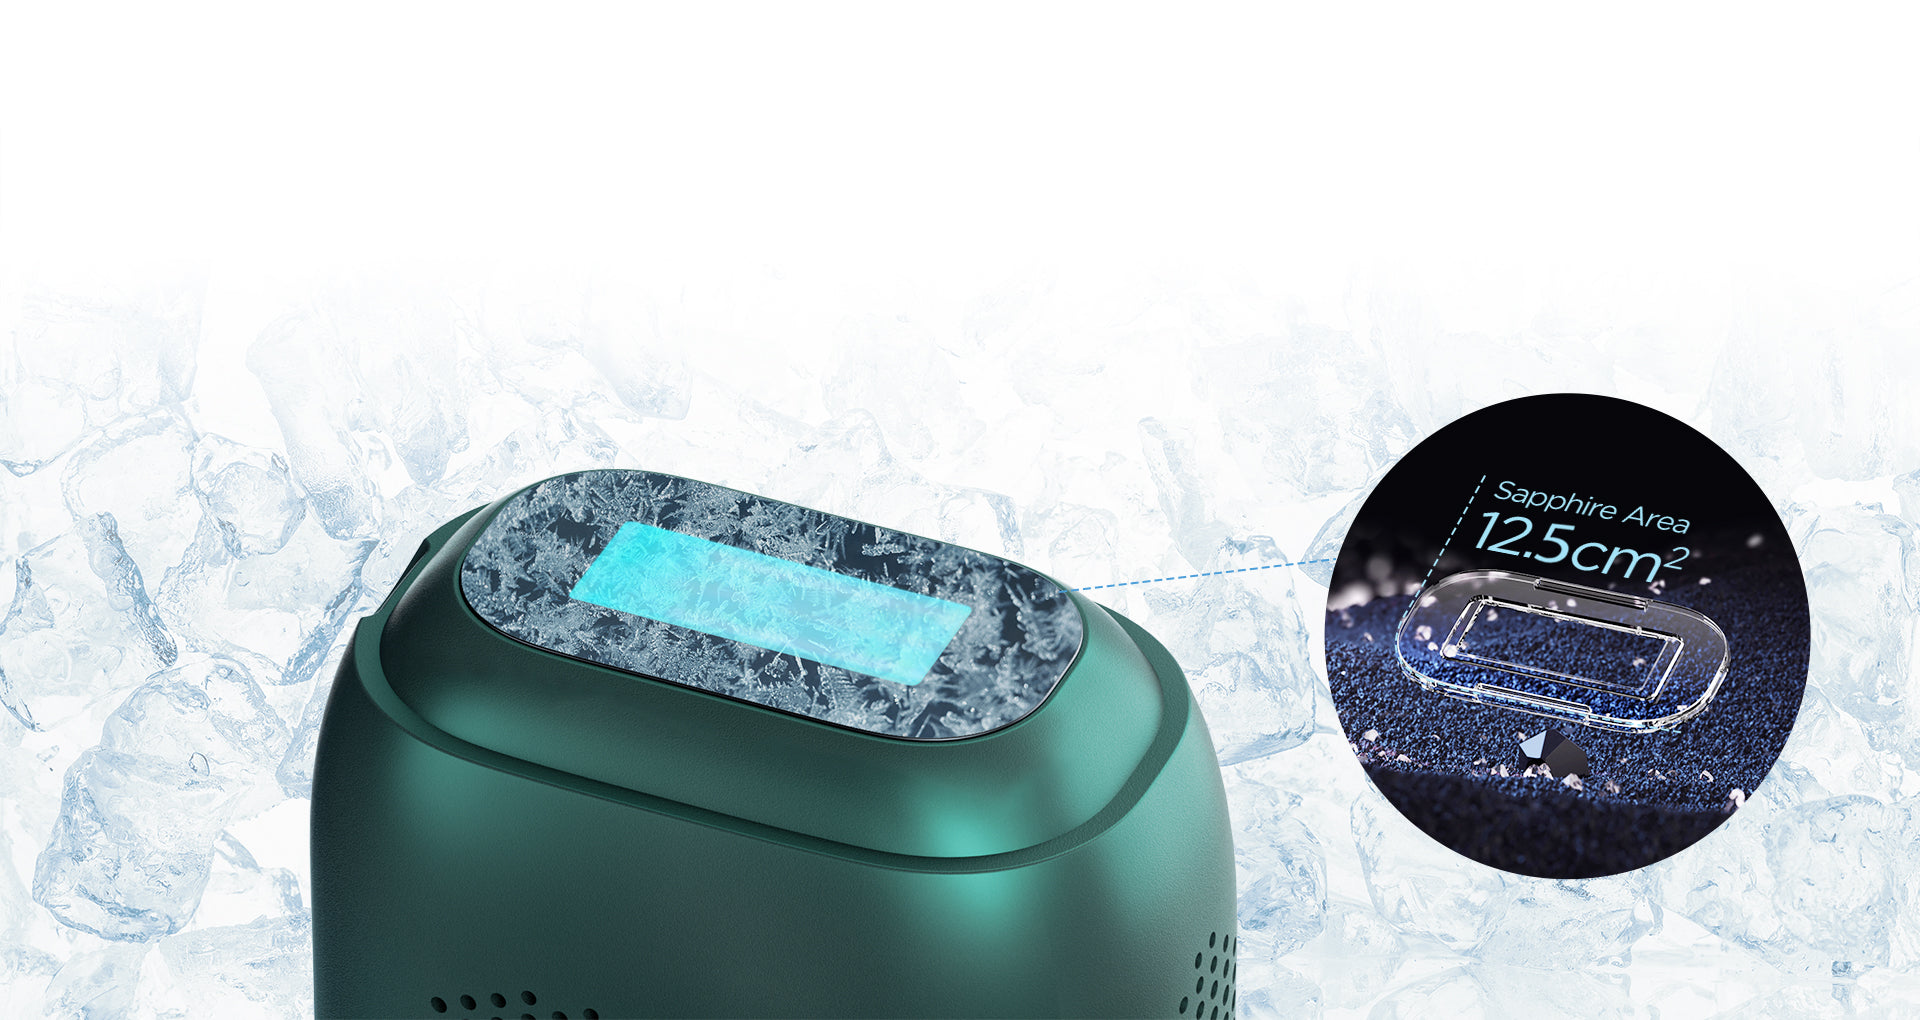 The JOVS IPL hair removal device's sapphire cooling area highlighted, ensuring a comfortable and safe skin-cooling effect during hair removal treatment.